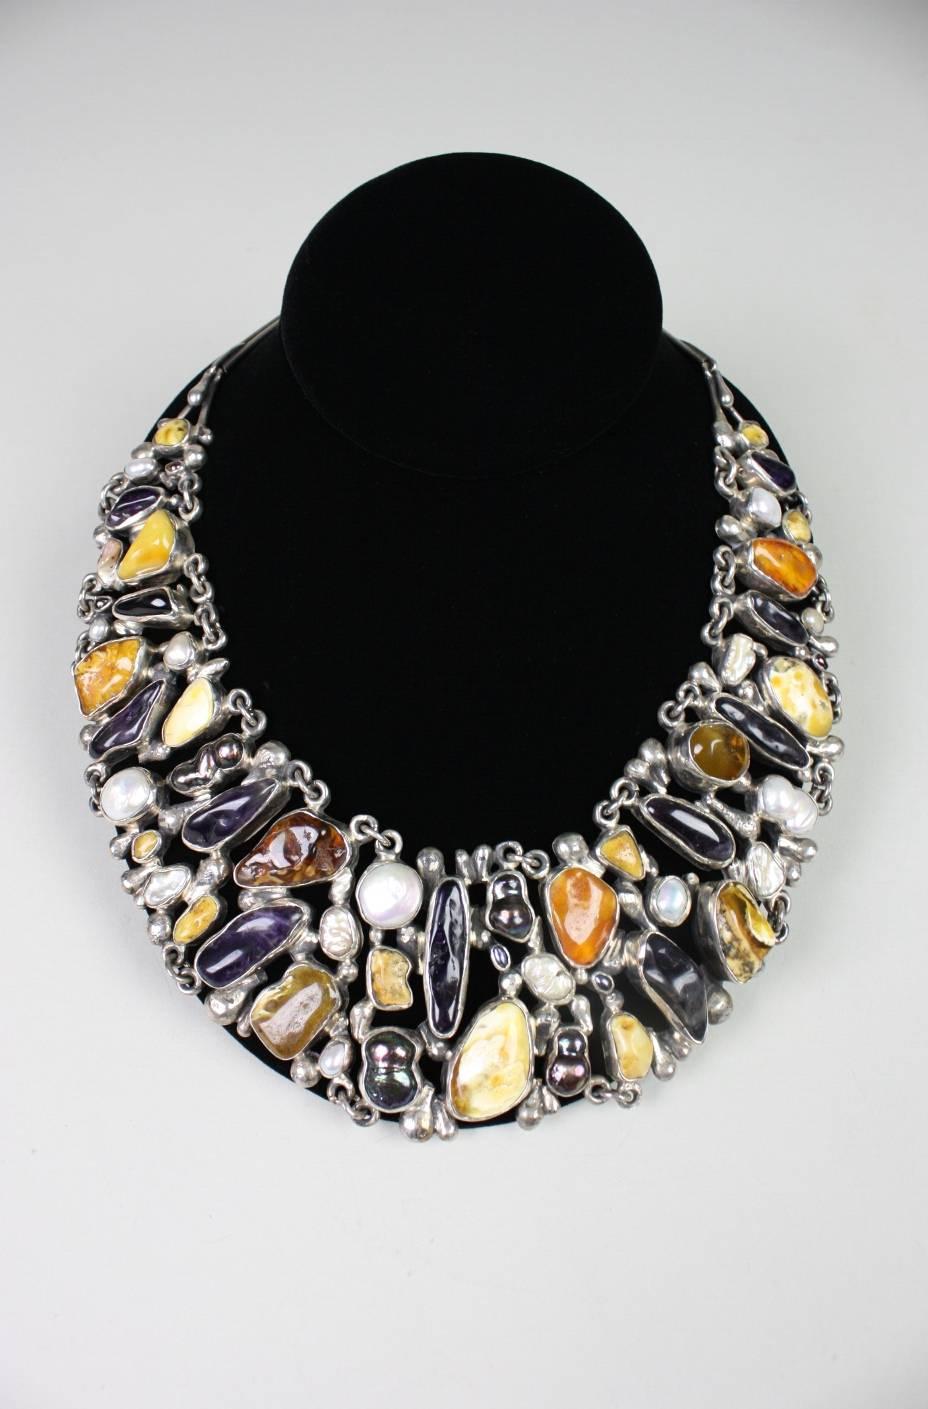 Stunning statement necklace from Jan Pomianowski  is comprised of nuggets of Baltic amber and amethyst along with pearls that are set in polished sterling silver. 

About Jan Pomianowski-
Jan Pomianowski was born in 1958. Graduated from the Faculty